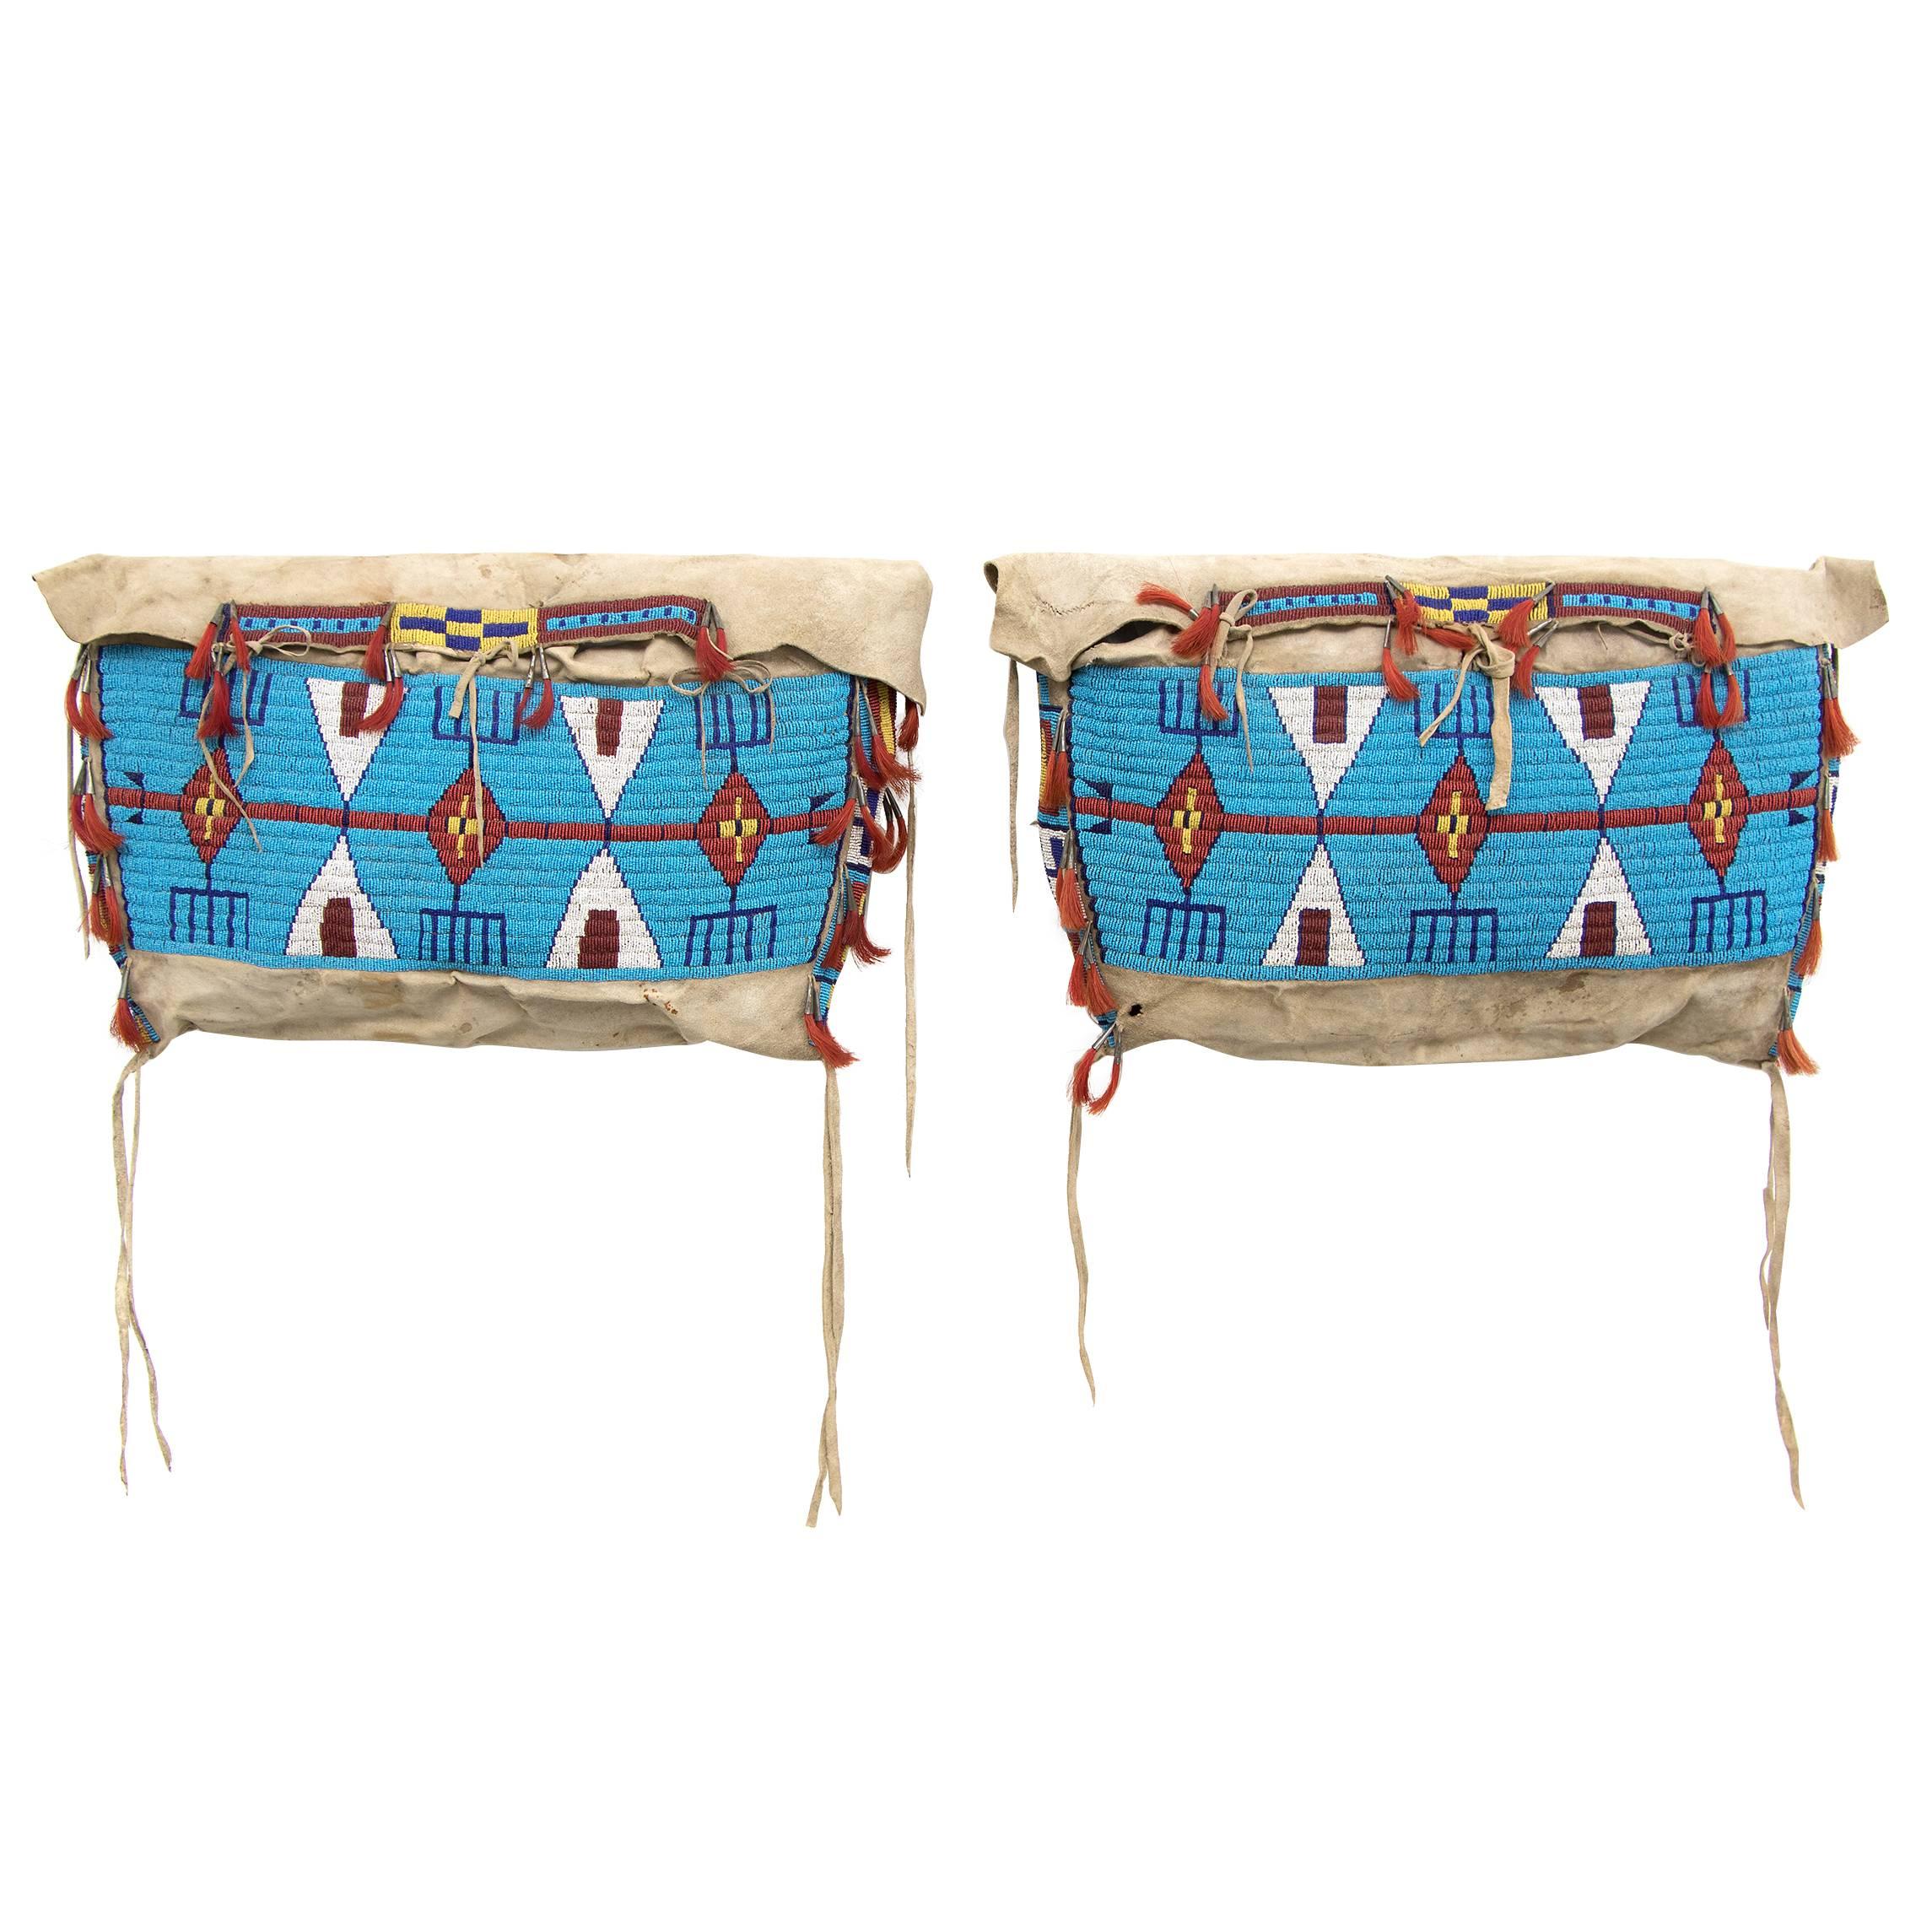 Antique Native American Beaded Possible Bags, Sioux (Plains), 19th Century